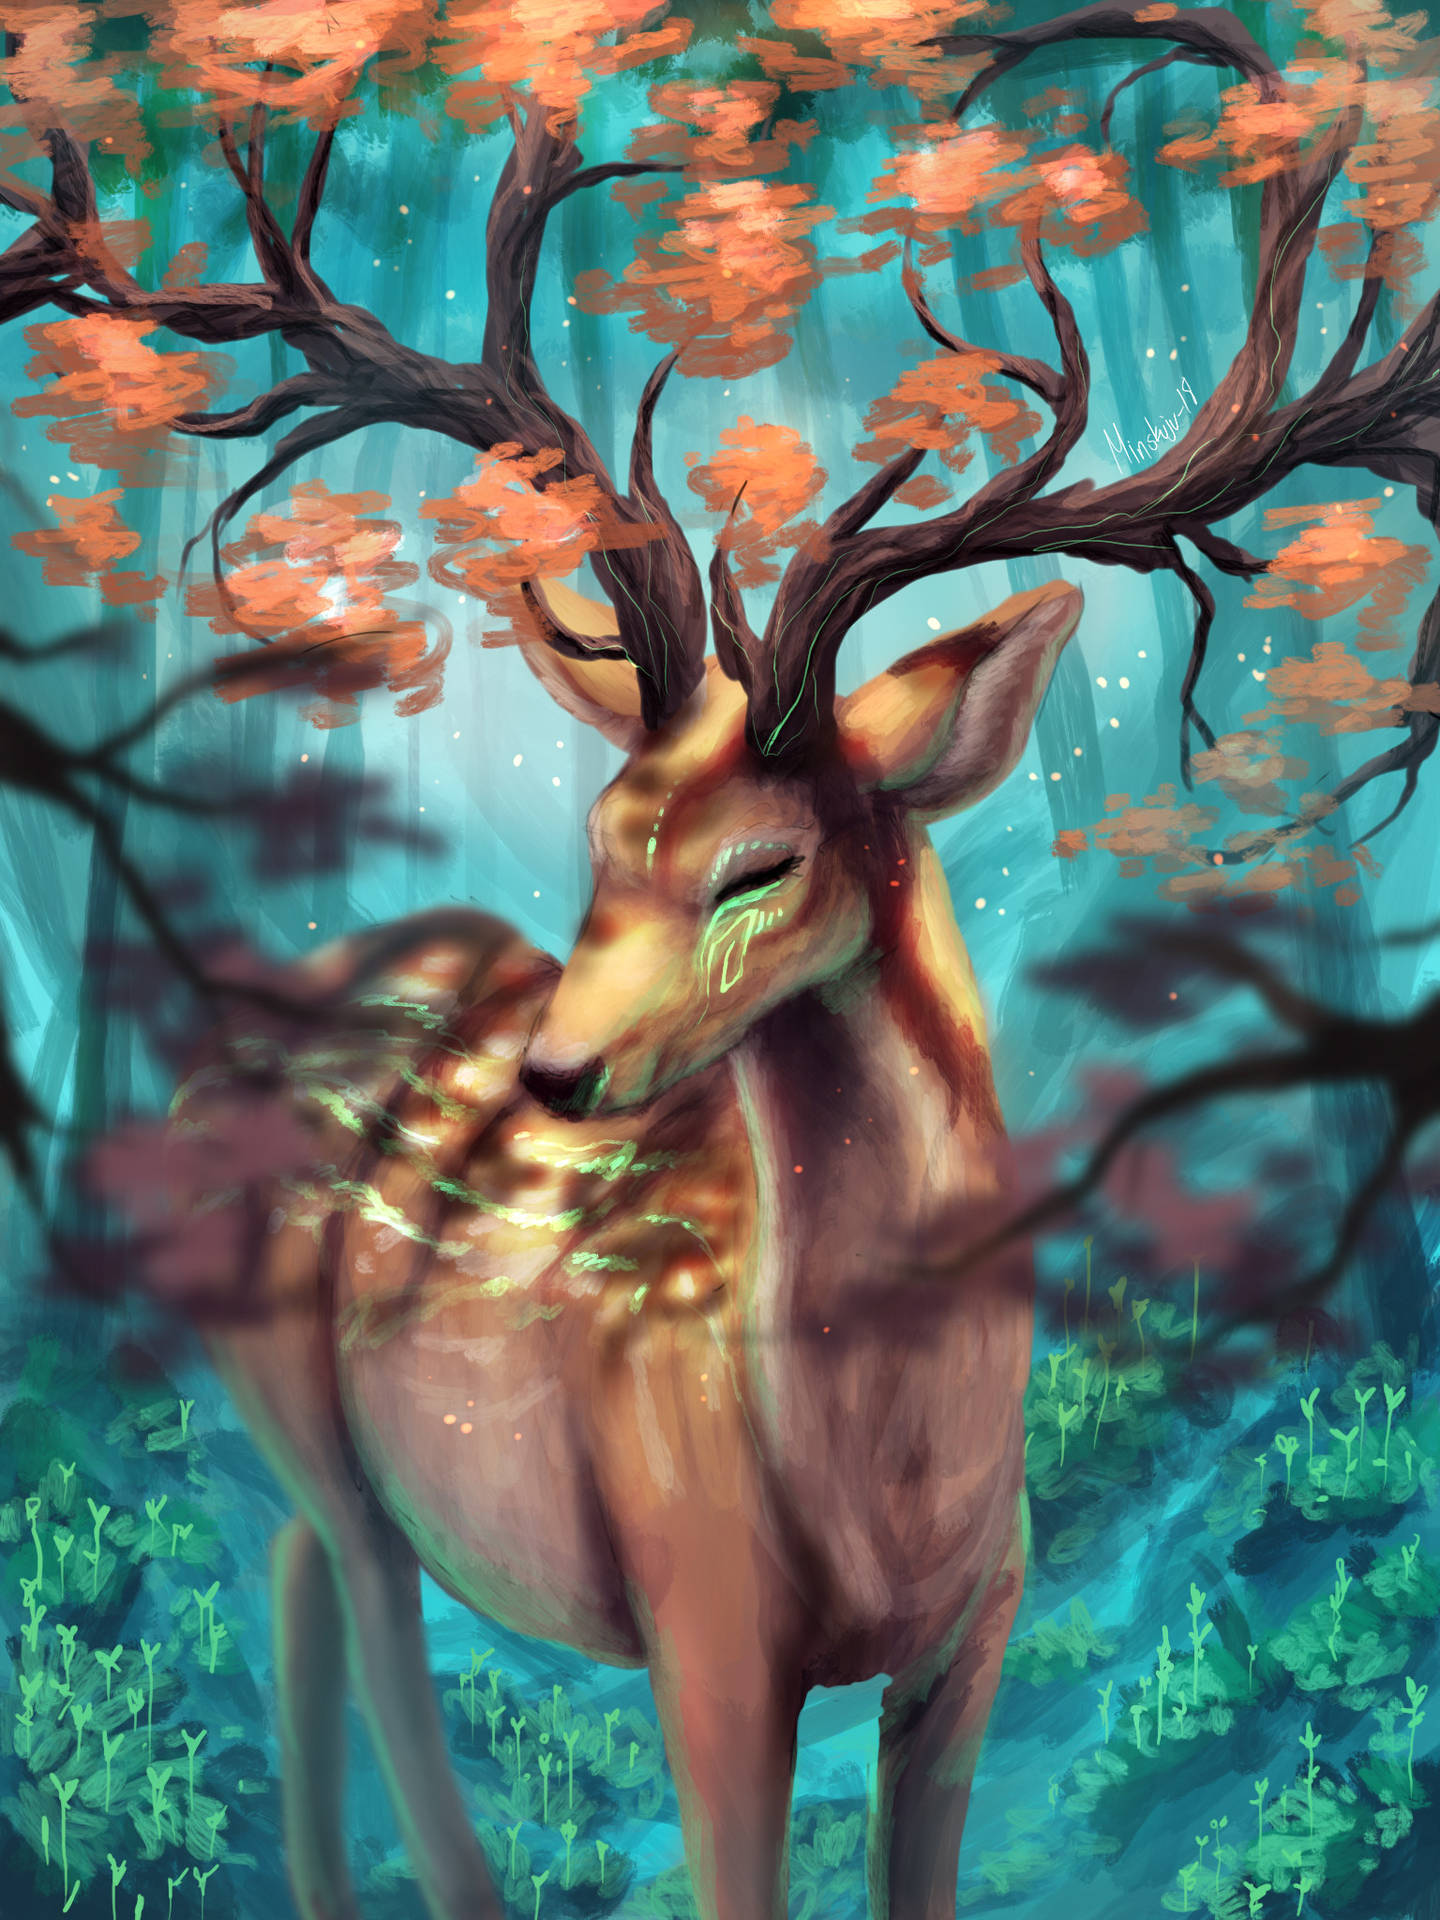 "Be enchanted by the magical deer patronus painting!" Wallpaper